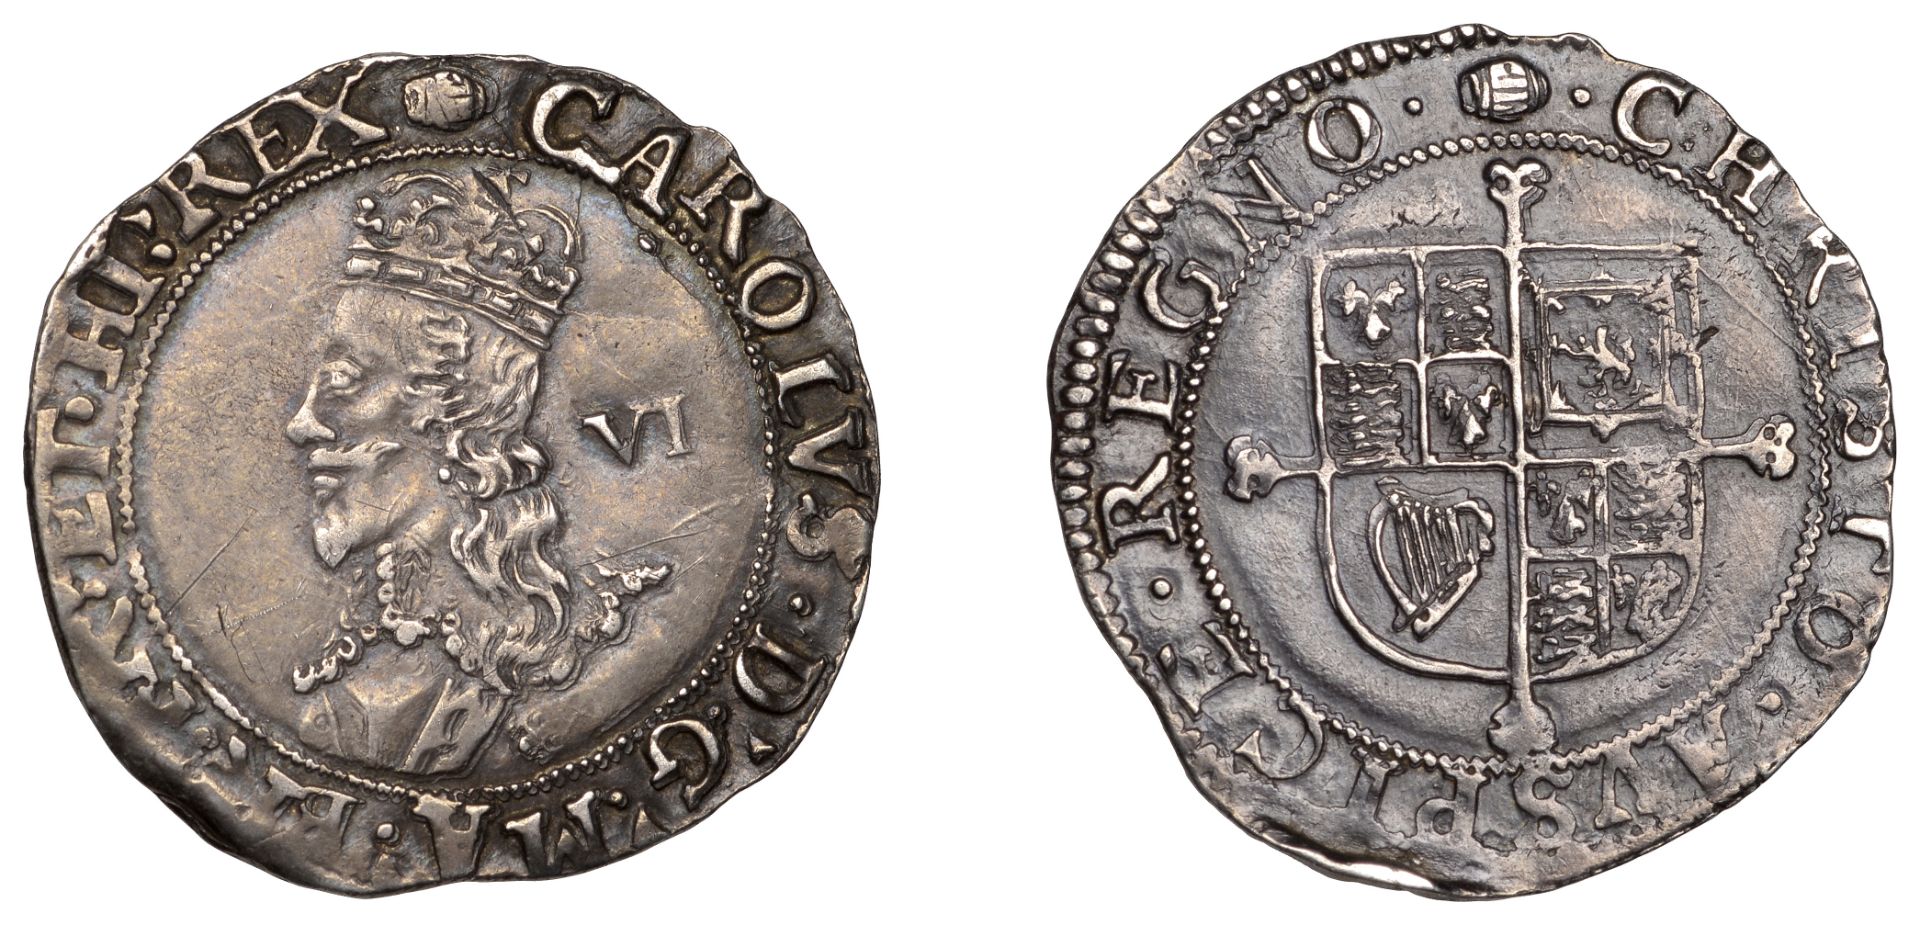 Charles I (1625-1649), Tower mint, Sixpence, Gp E, type 4.1, mm. tun, bust with double-arche...